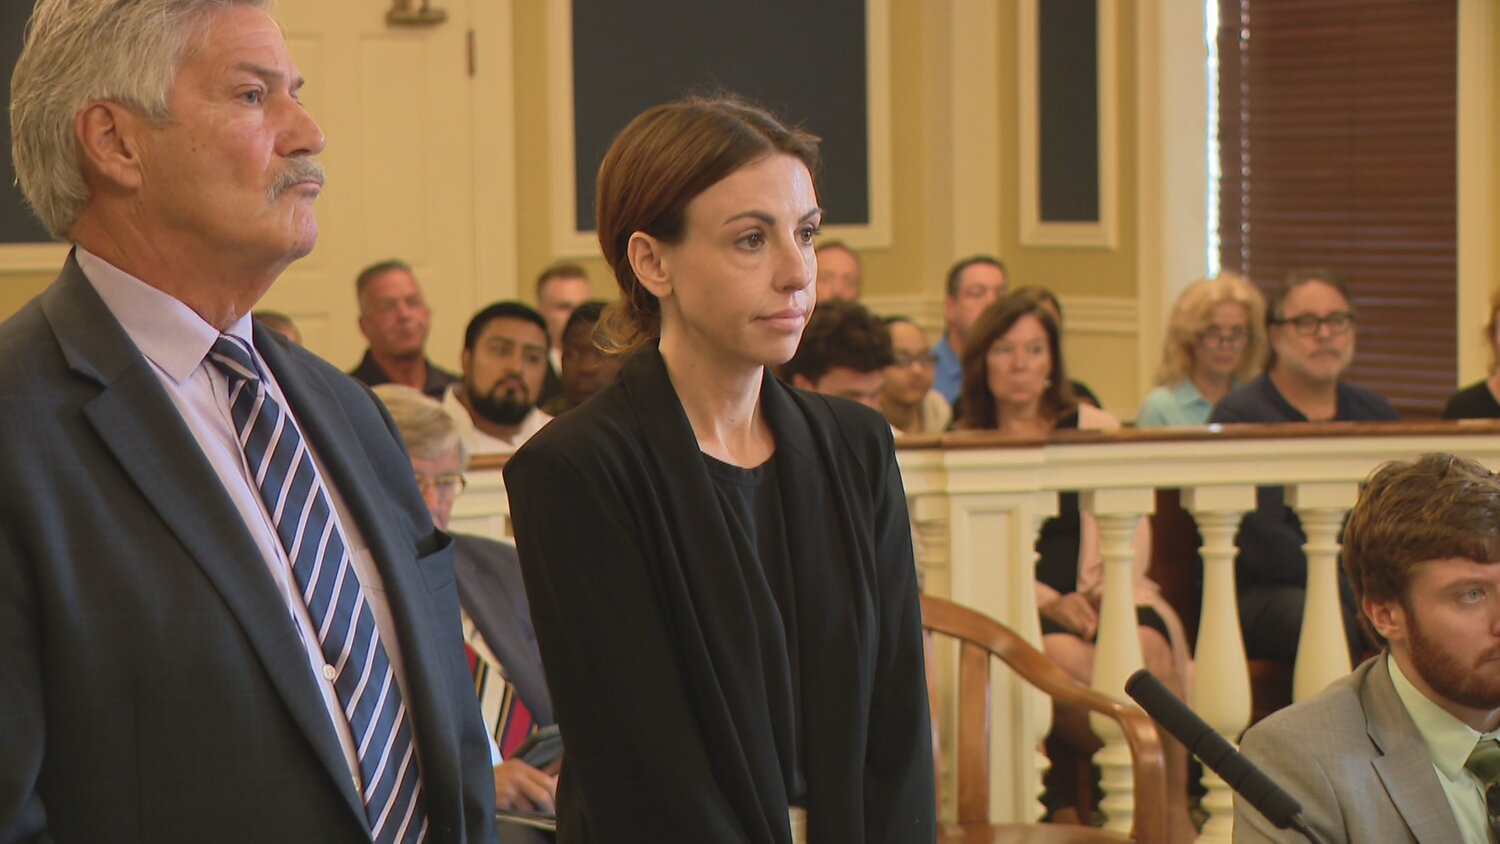 Barrington resident Rachel Onik (right) is shown during her arraignment on Sept. 13. Newport Police levied two new felony charges against Onik recently.